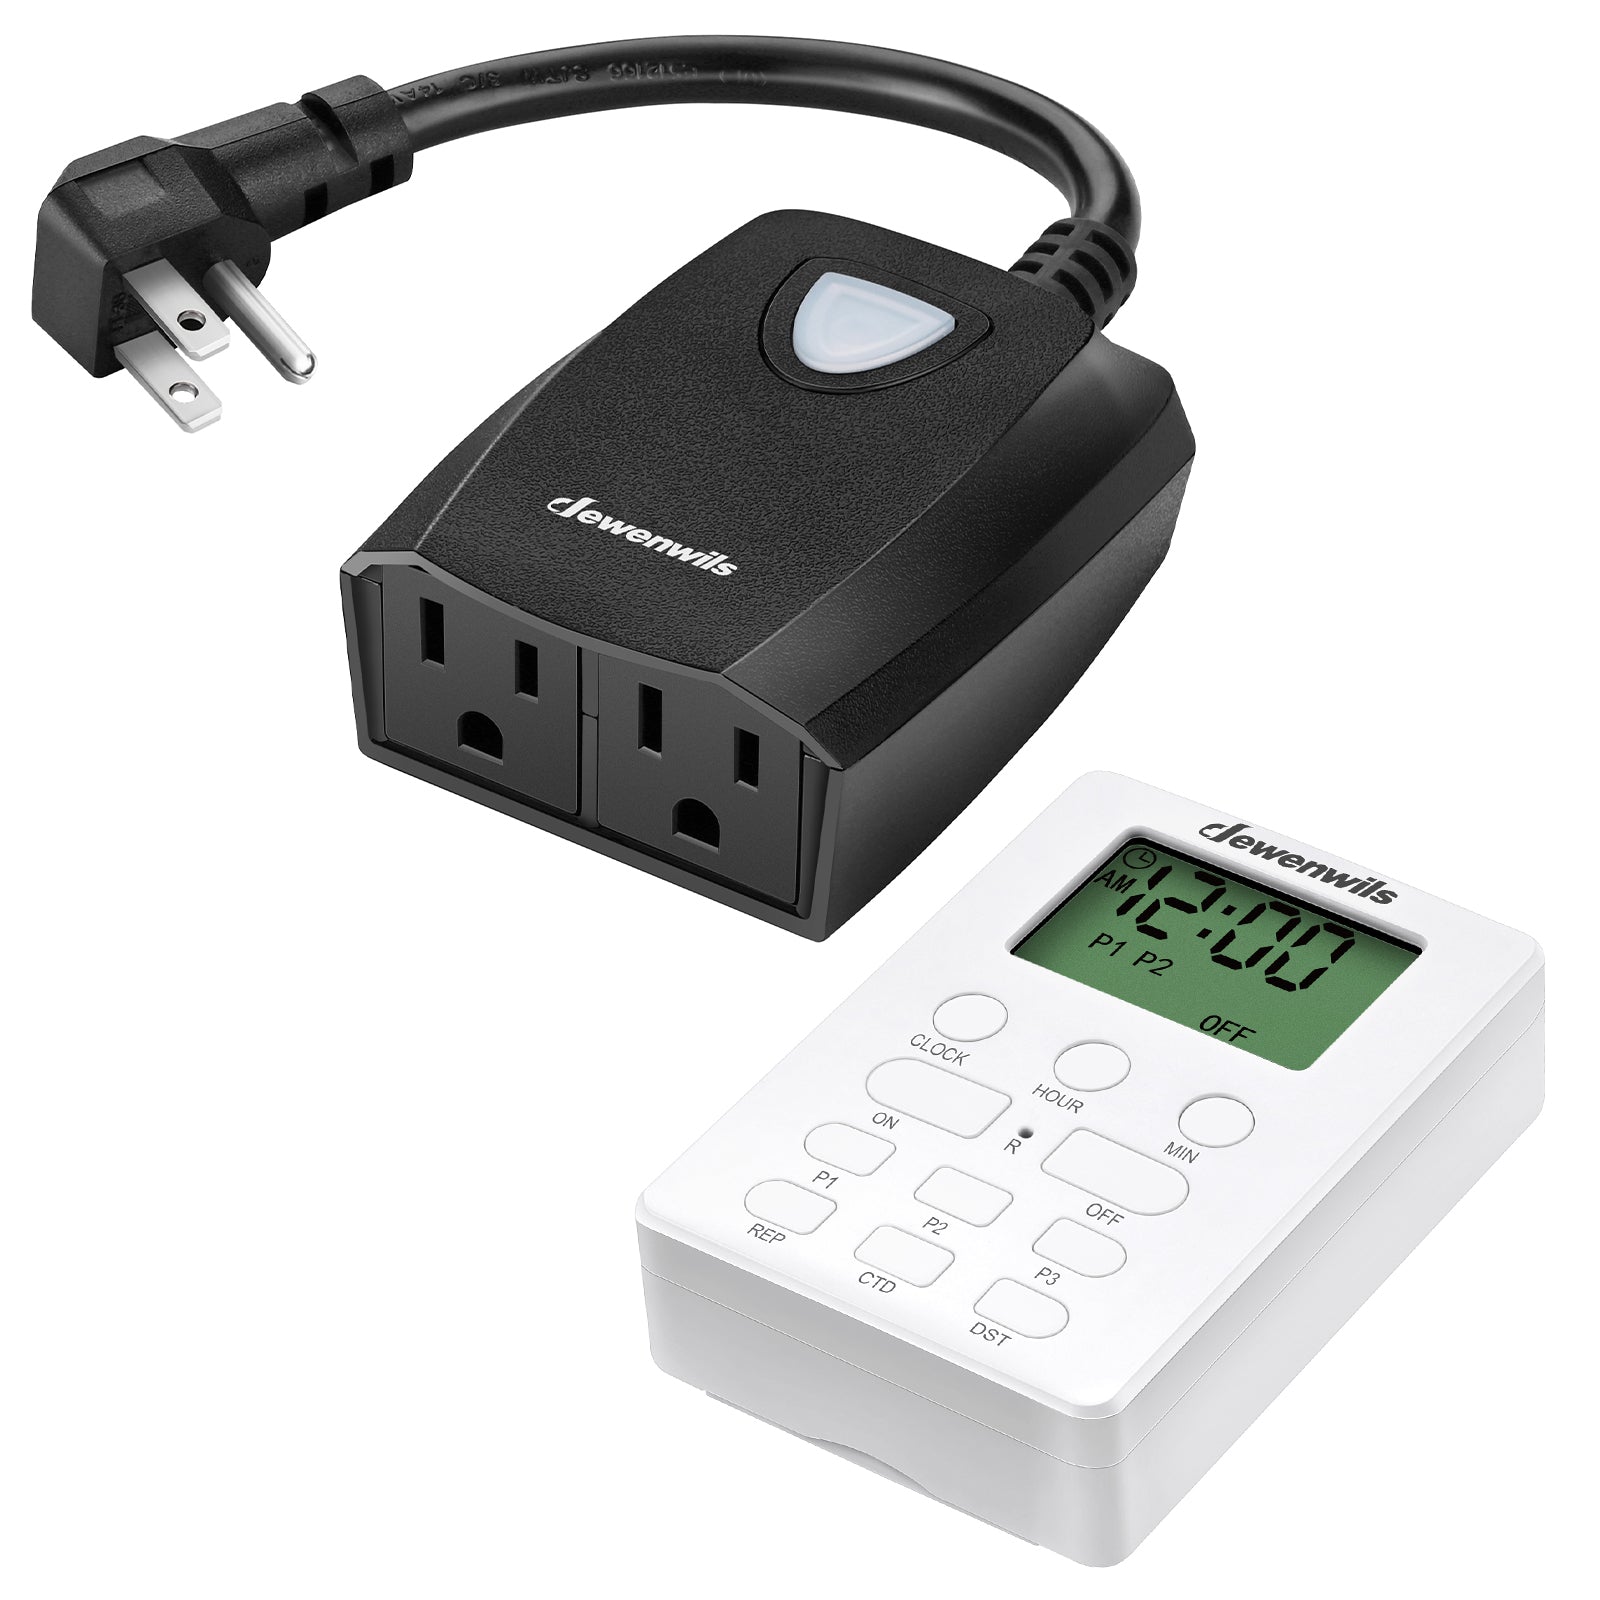 DEWENWILS Outdoor Remote Control Outlet with 2 Remotes Power Strip  Weatherproof